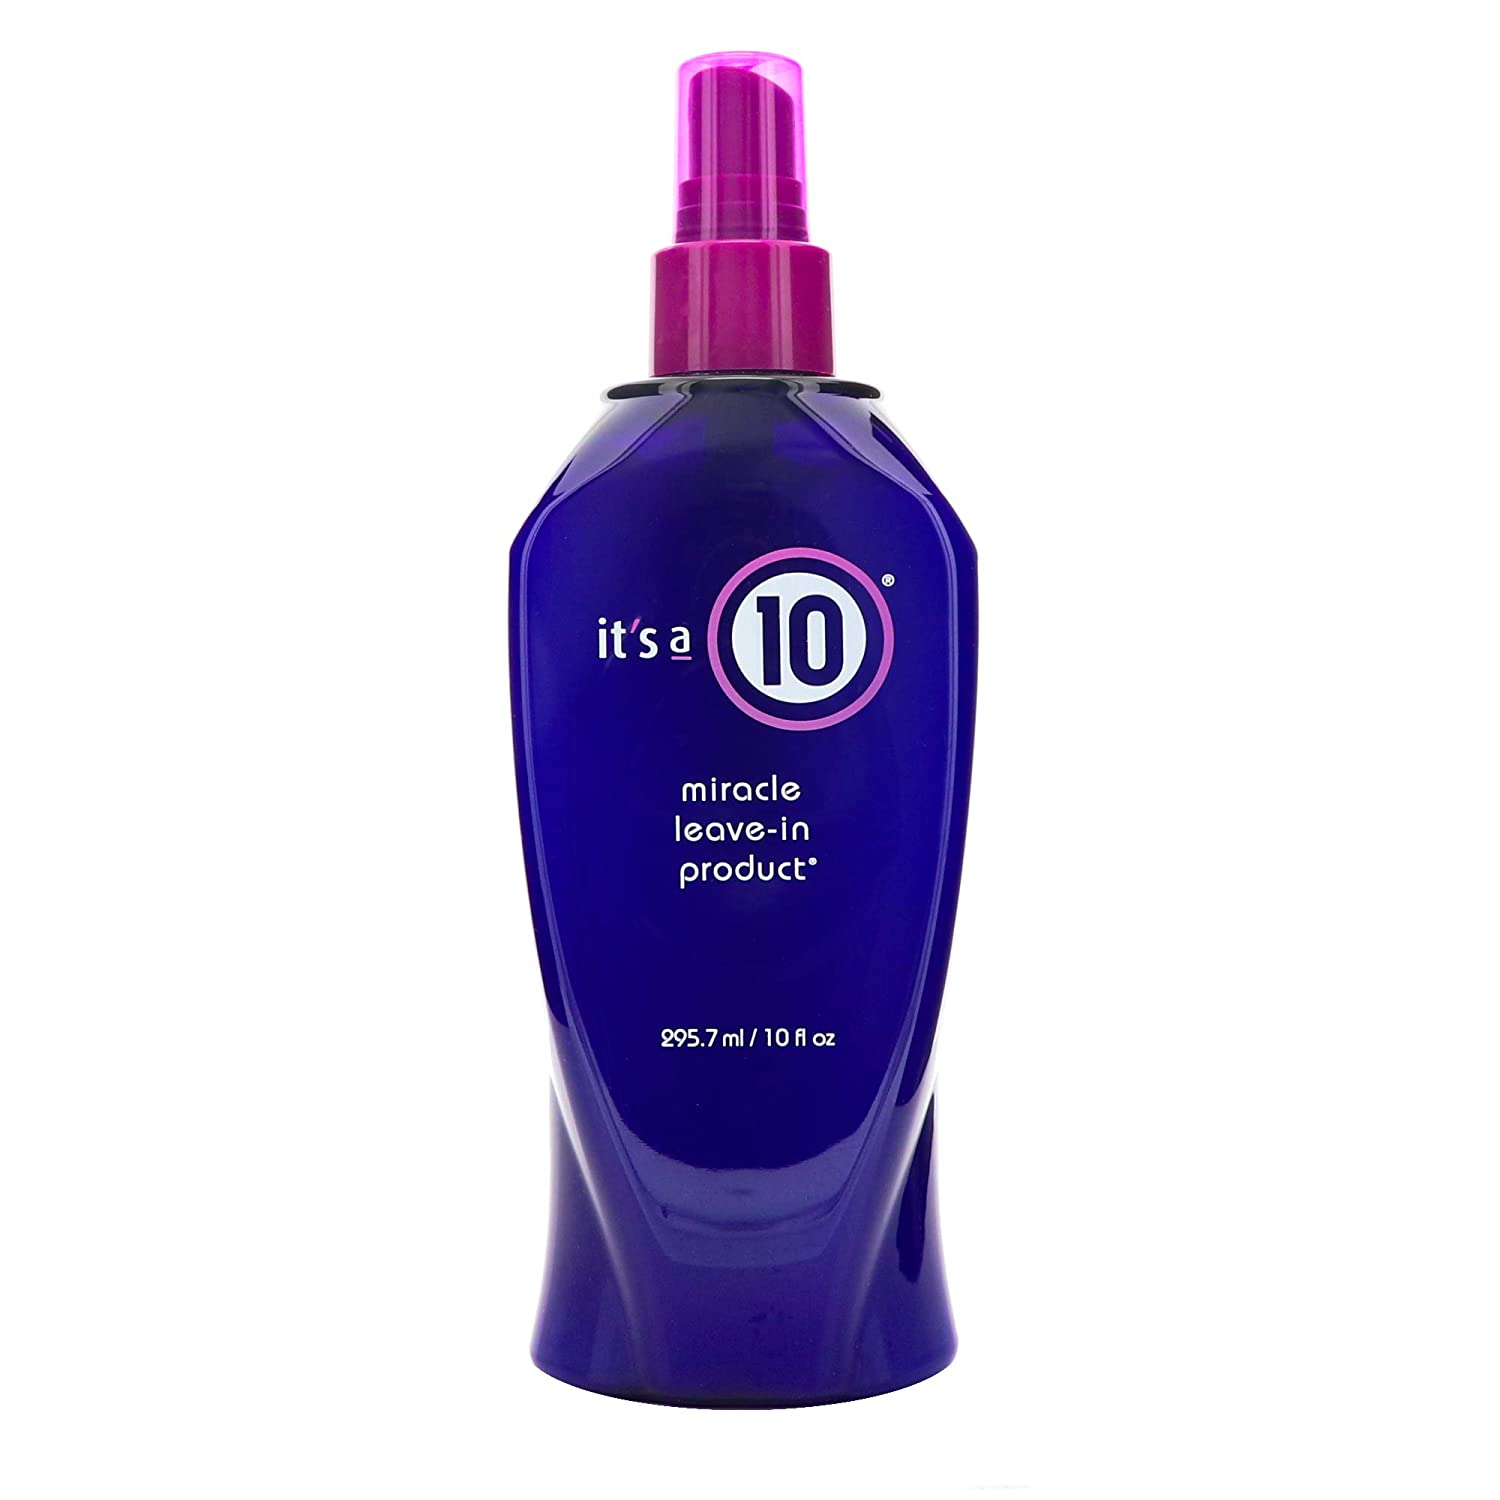 It's a 10 Haircare Miracle Leave-In Product, 10 fl. oz.